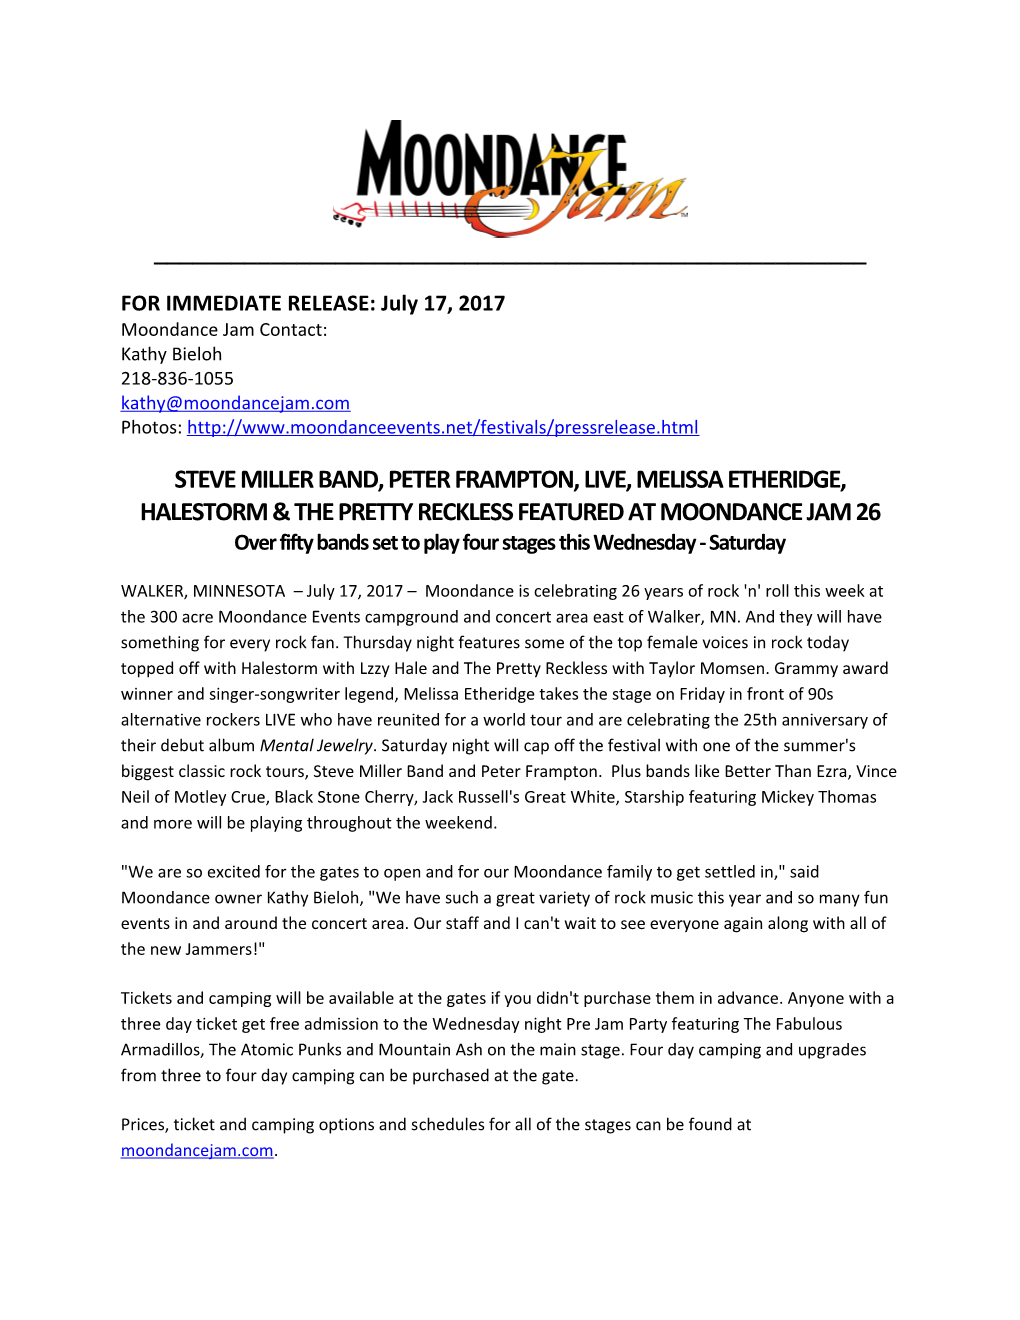 FOR IMMEDIATE RELEASE: July 17, 2017 Moondance Jam Contact: Kathy Bieloh 218-836-1055 Photos